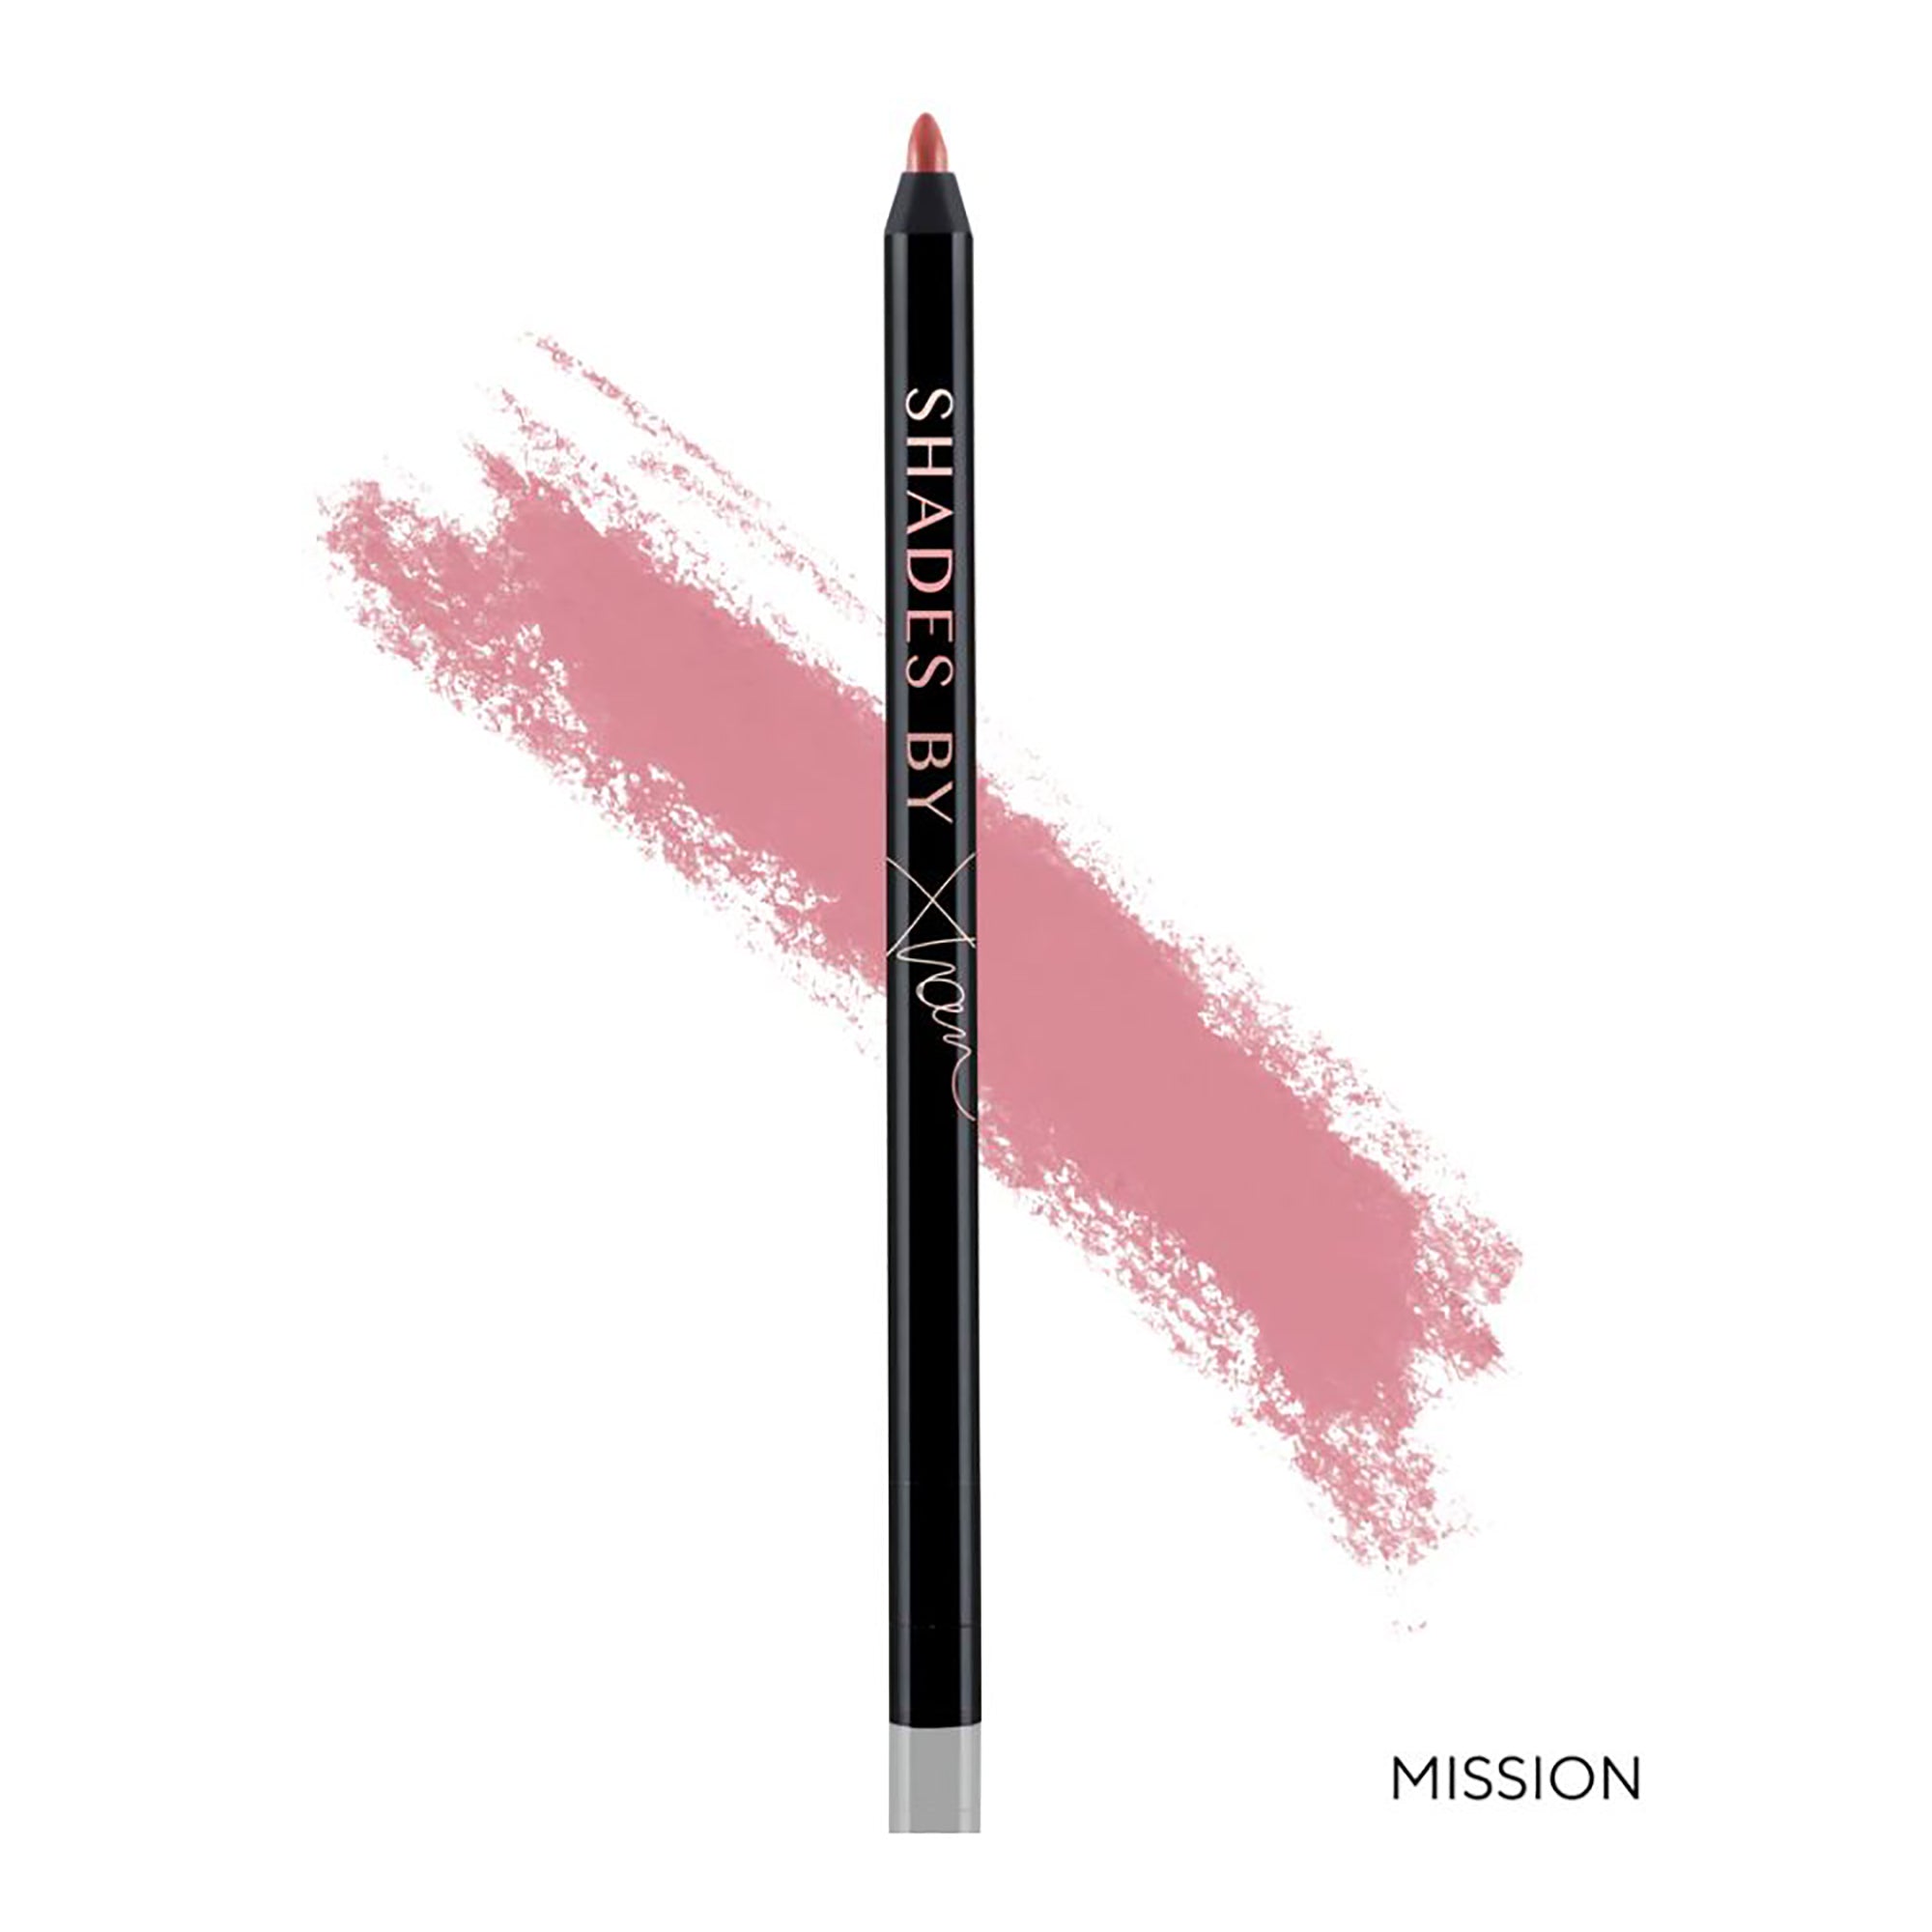 Shades by Shan Lip Liner in Shade Mission / MISSION